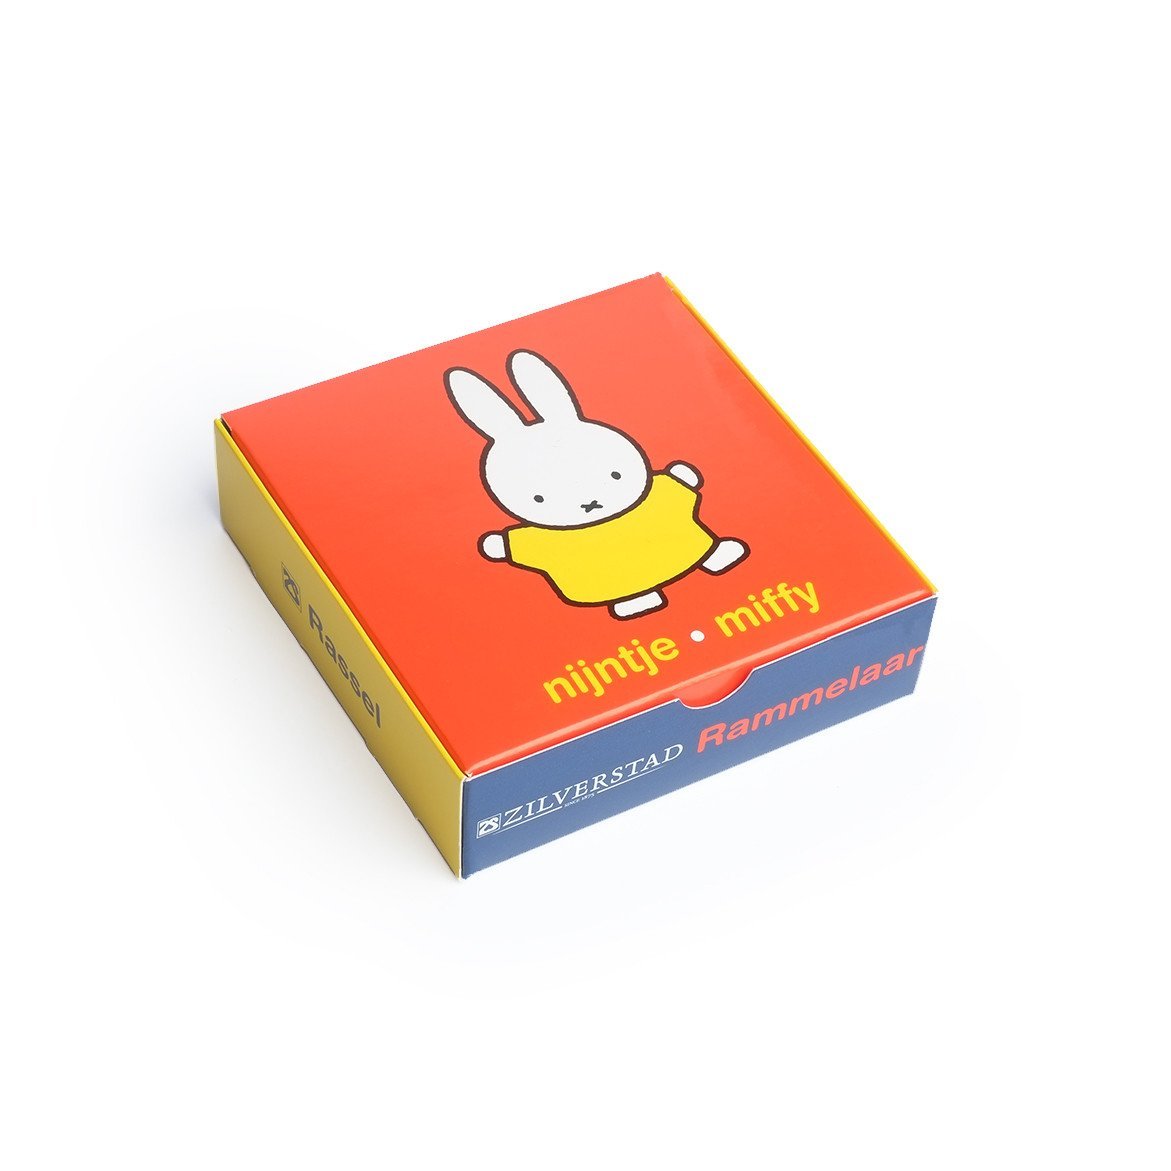 Miffy Nijntje Silver-plated rattle with miffy on a ring box by Zilverstad - Gift for Newborns and Baby Showers⎪Lil'Etiquette Clothiers